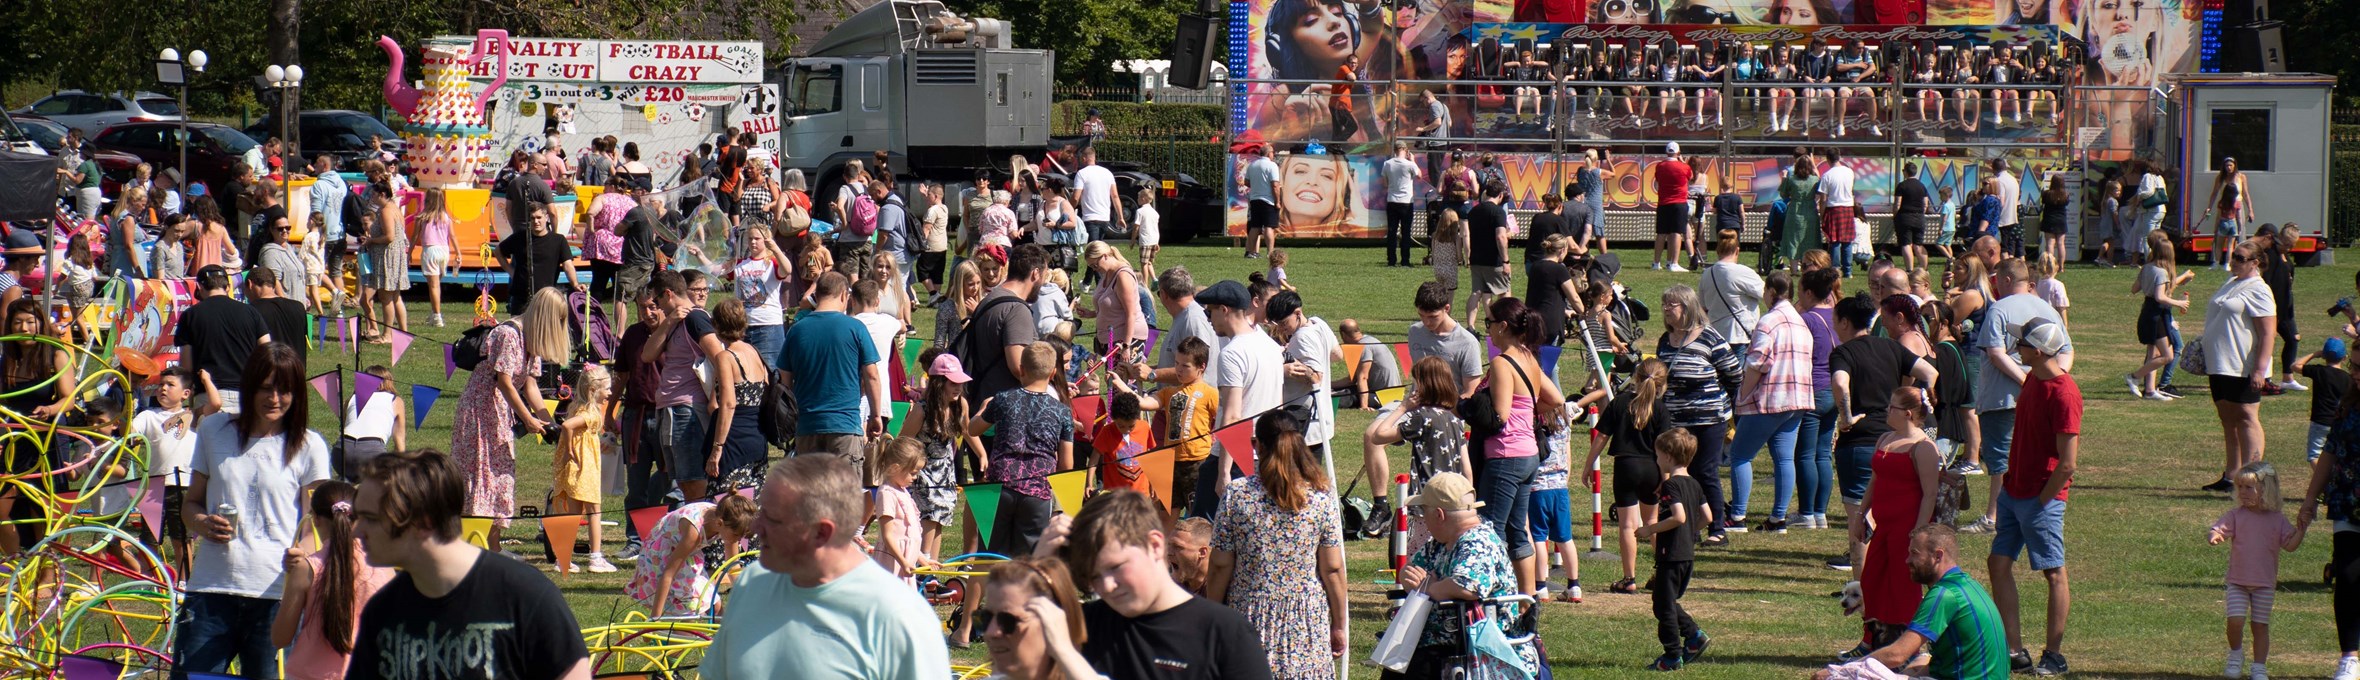 Crowds of people on Sutton Lawn at last year's Ashfield day